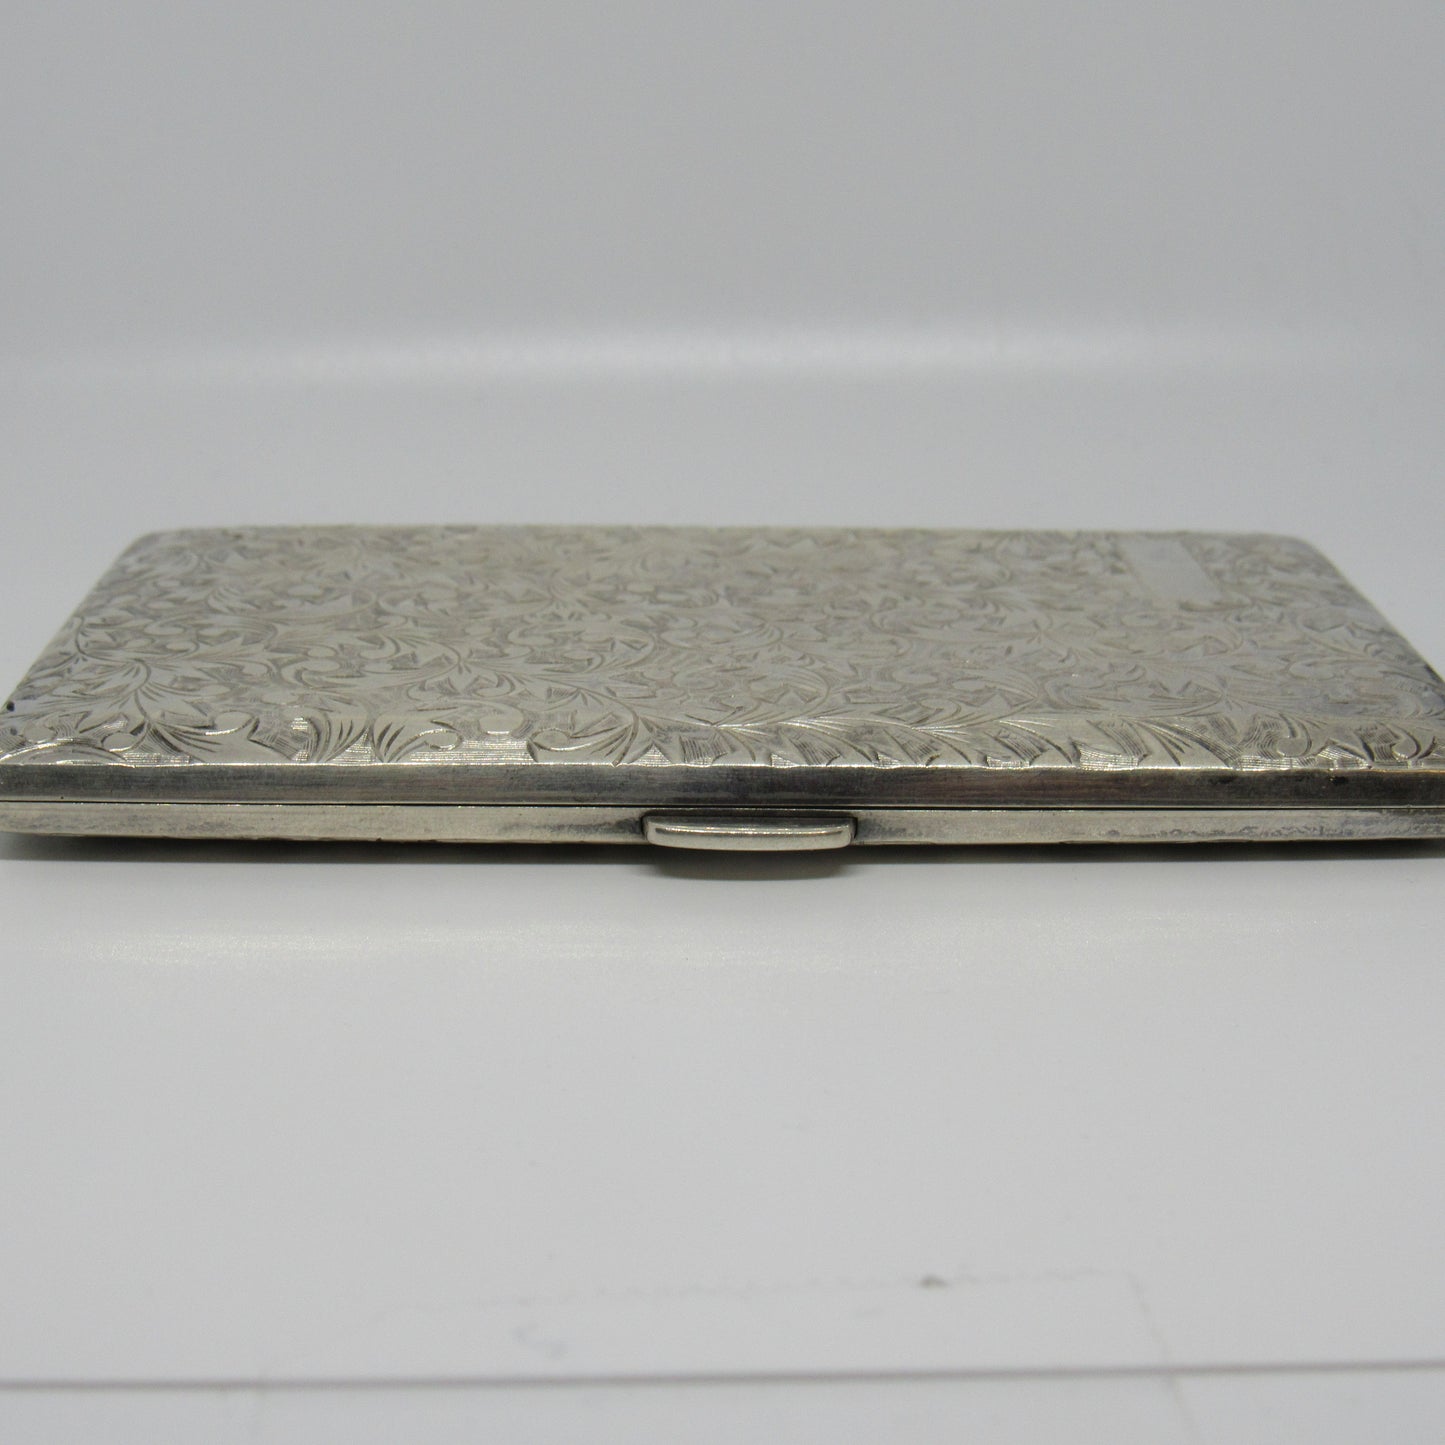 Vintage Sterling Silver 950 Engraved Cigarette Case No Mono - 5 in x 3.25 in